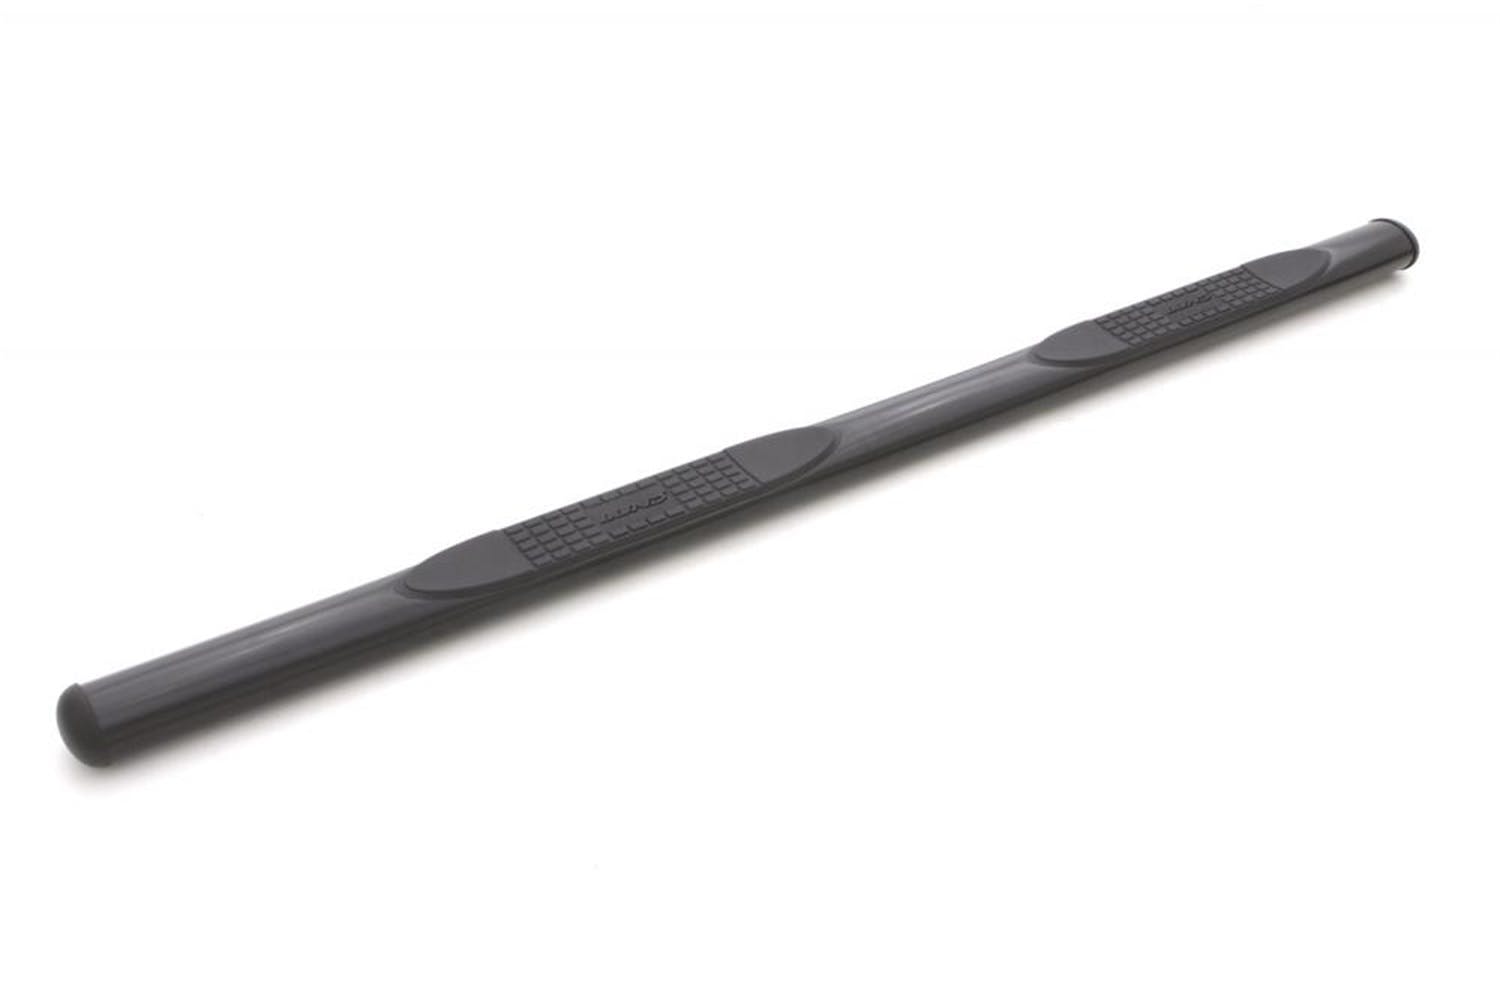 LUND 23690908 4 Inch Oval Straight Nerf Bar - Black 4 In OVAL STRAIGHT STEEL